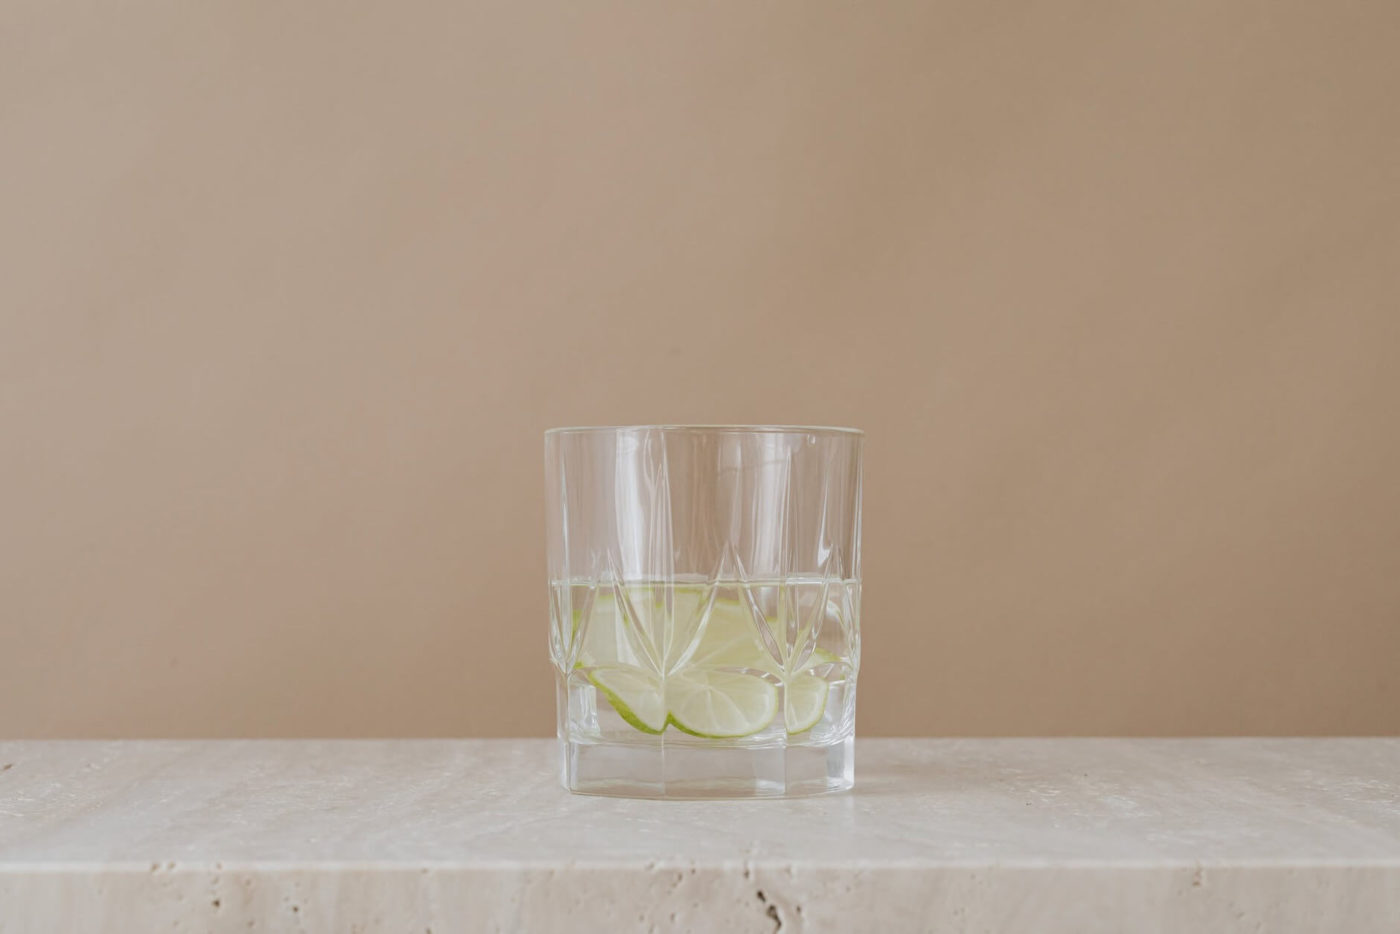 A glass with water and lime before the car shipping company comes to load the packages into the truck